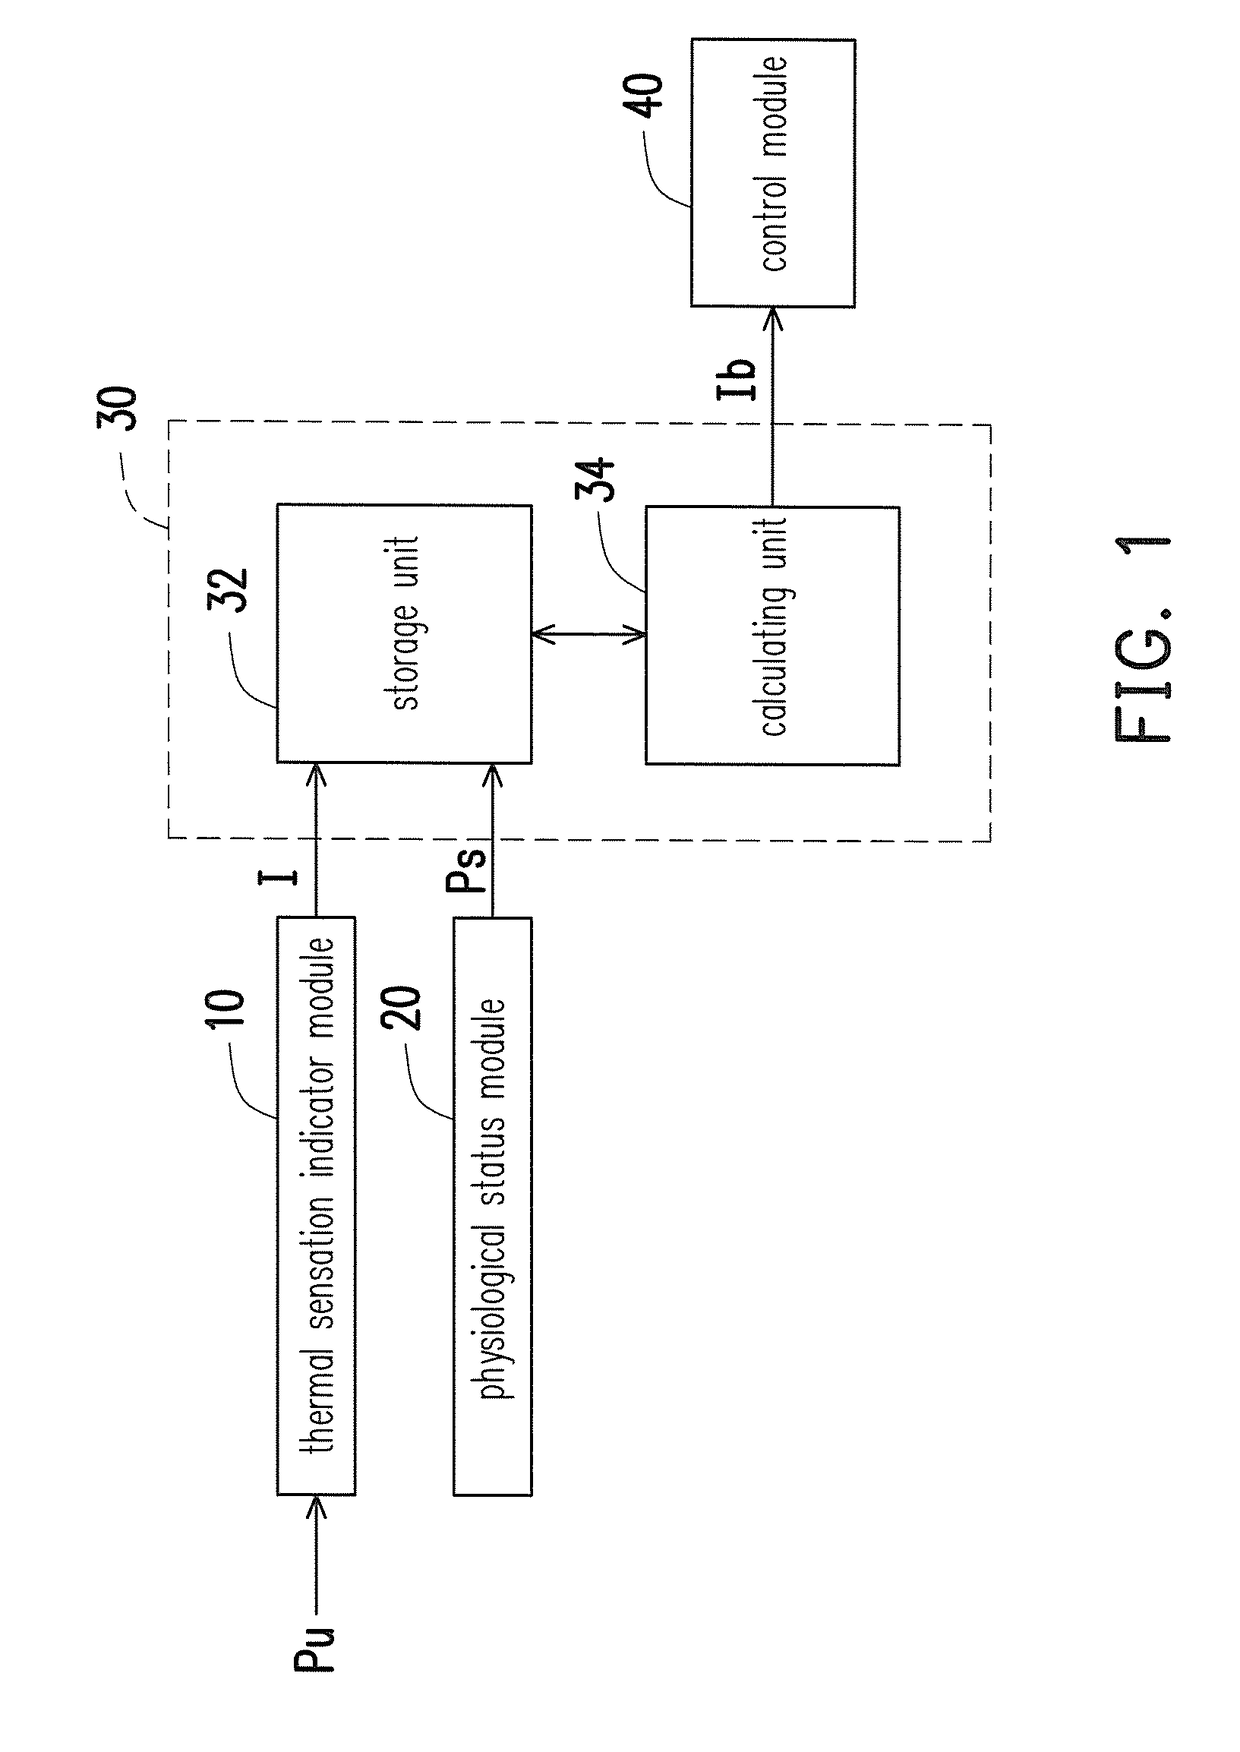 Sleeping environment control system and method